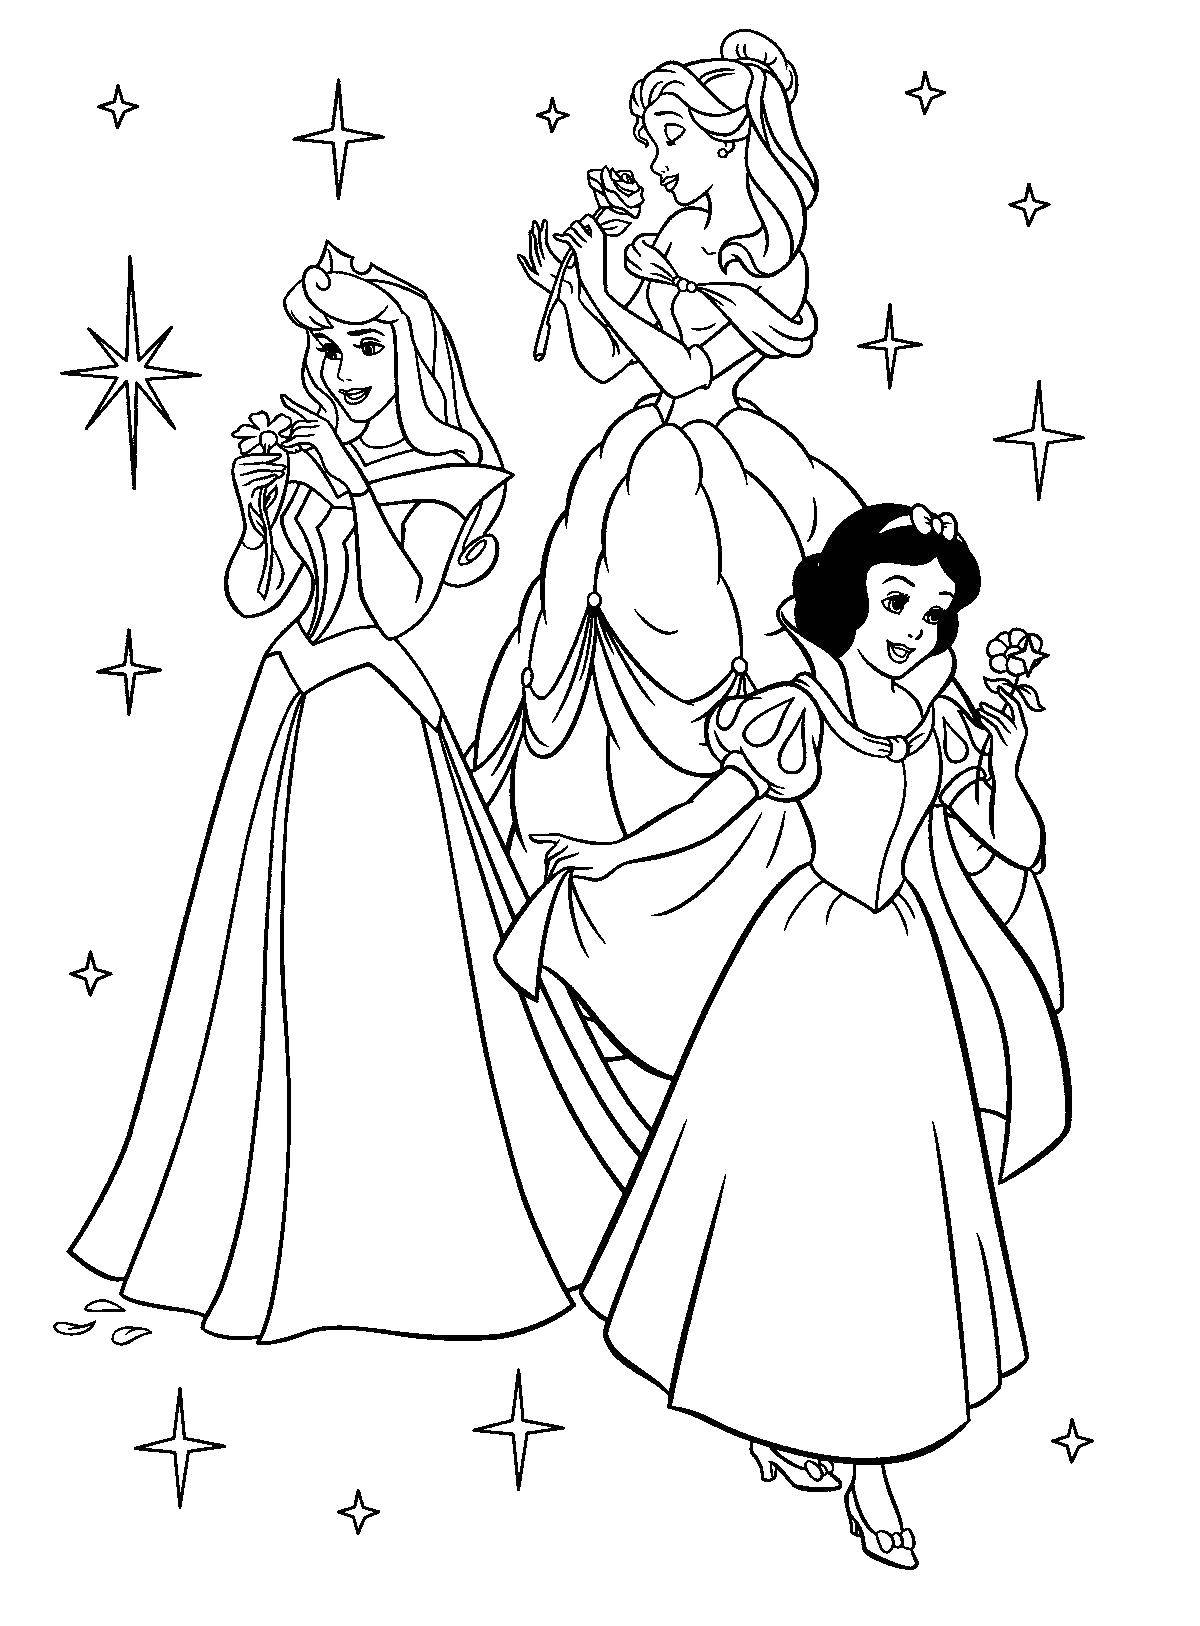 Coloring Sleeping beauty, Belle and snow white. Category Disney coloring pages. Tags:  Disney, Cinderella, Belle, Sleeping Beauty.